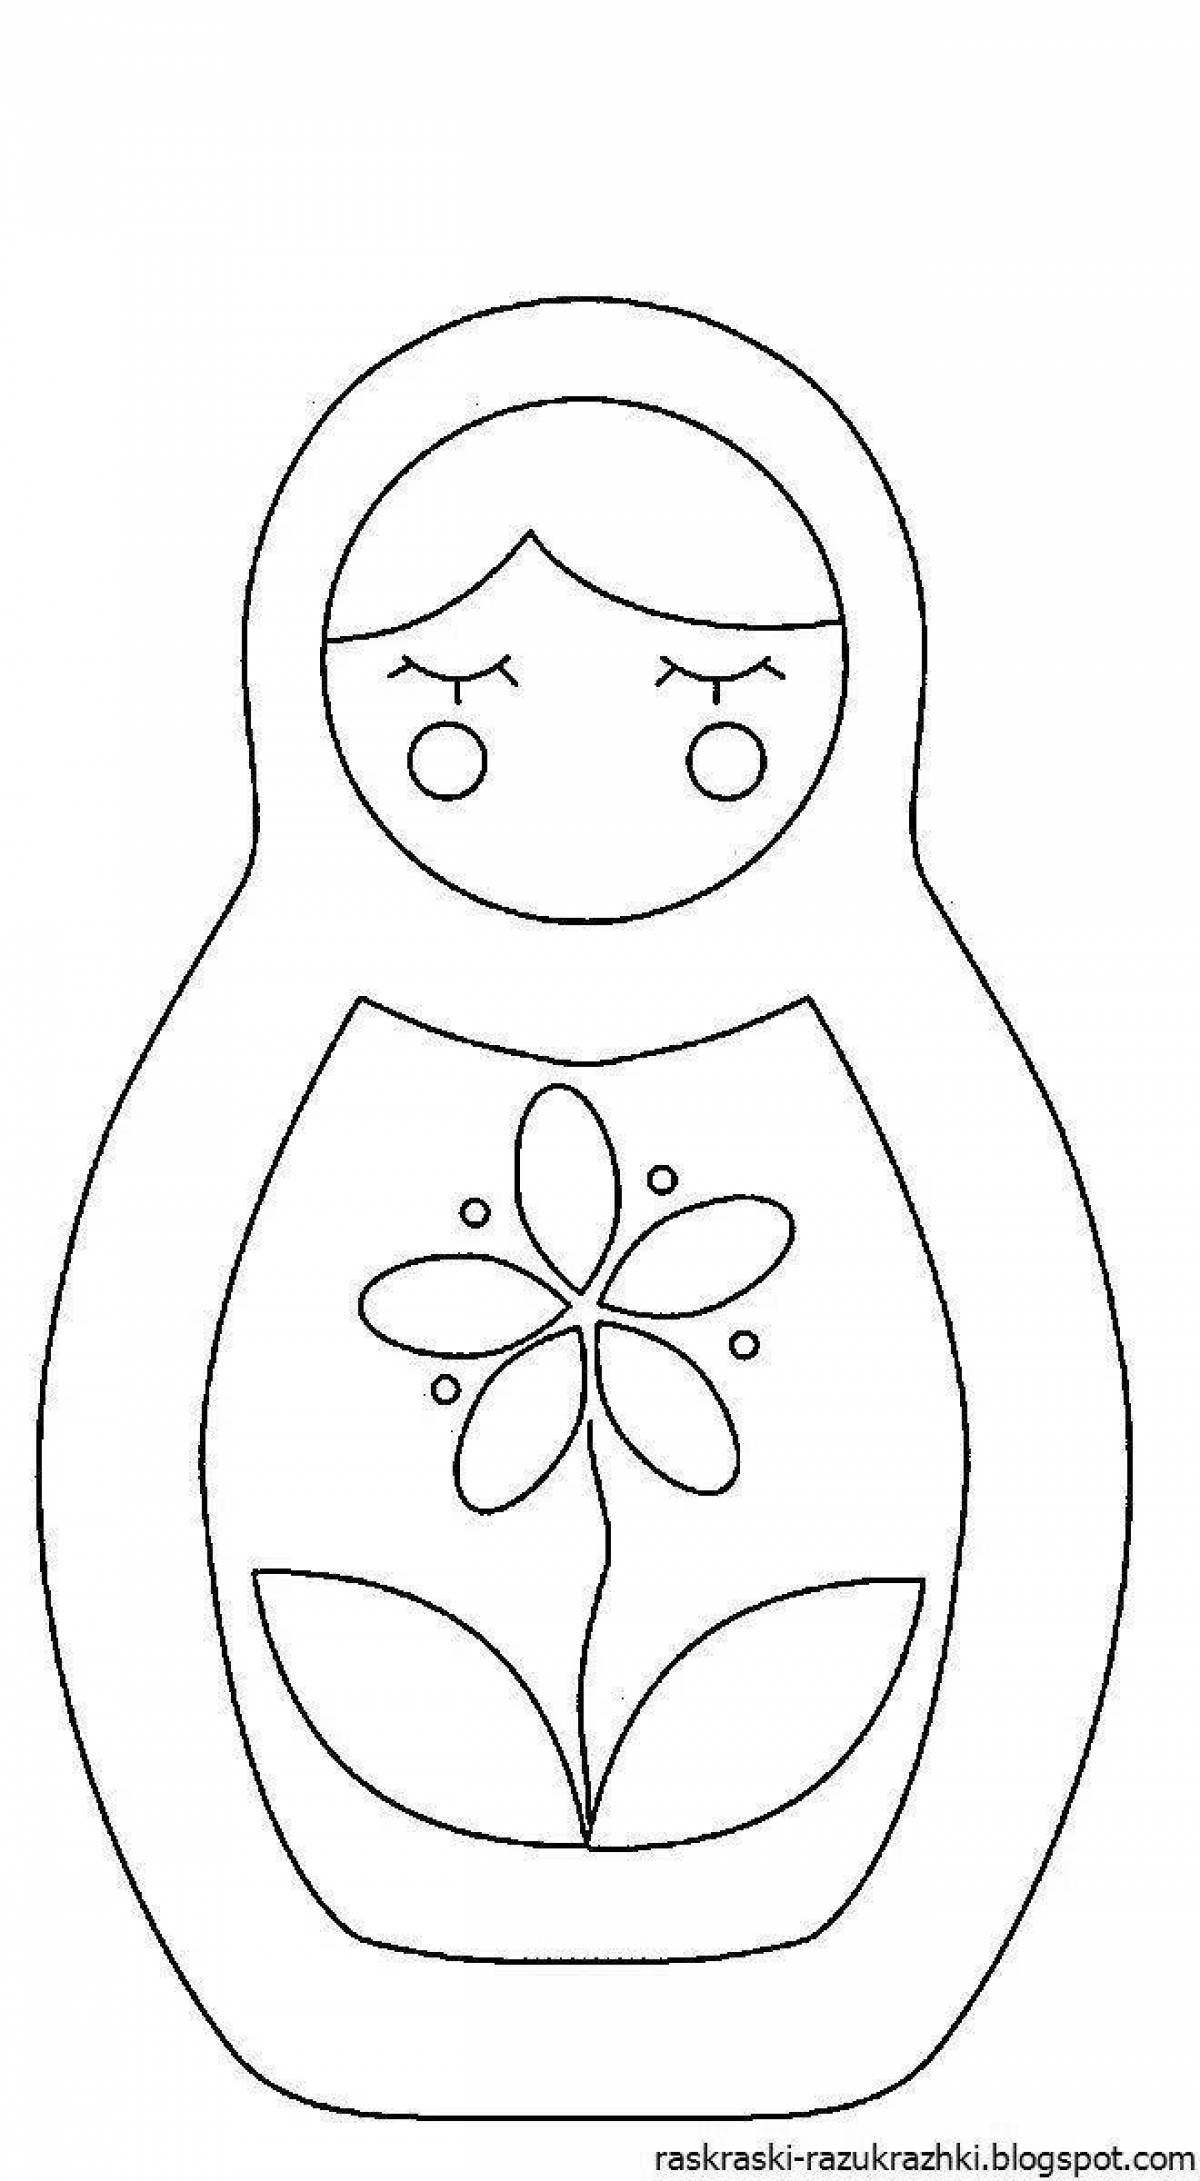 Coloring matryoshka doll for 3 year olds